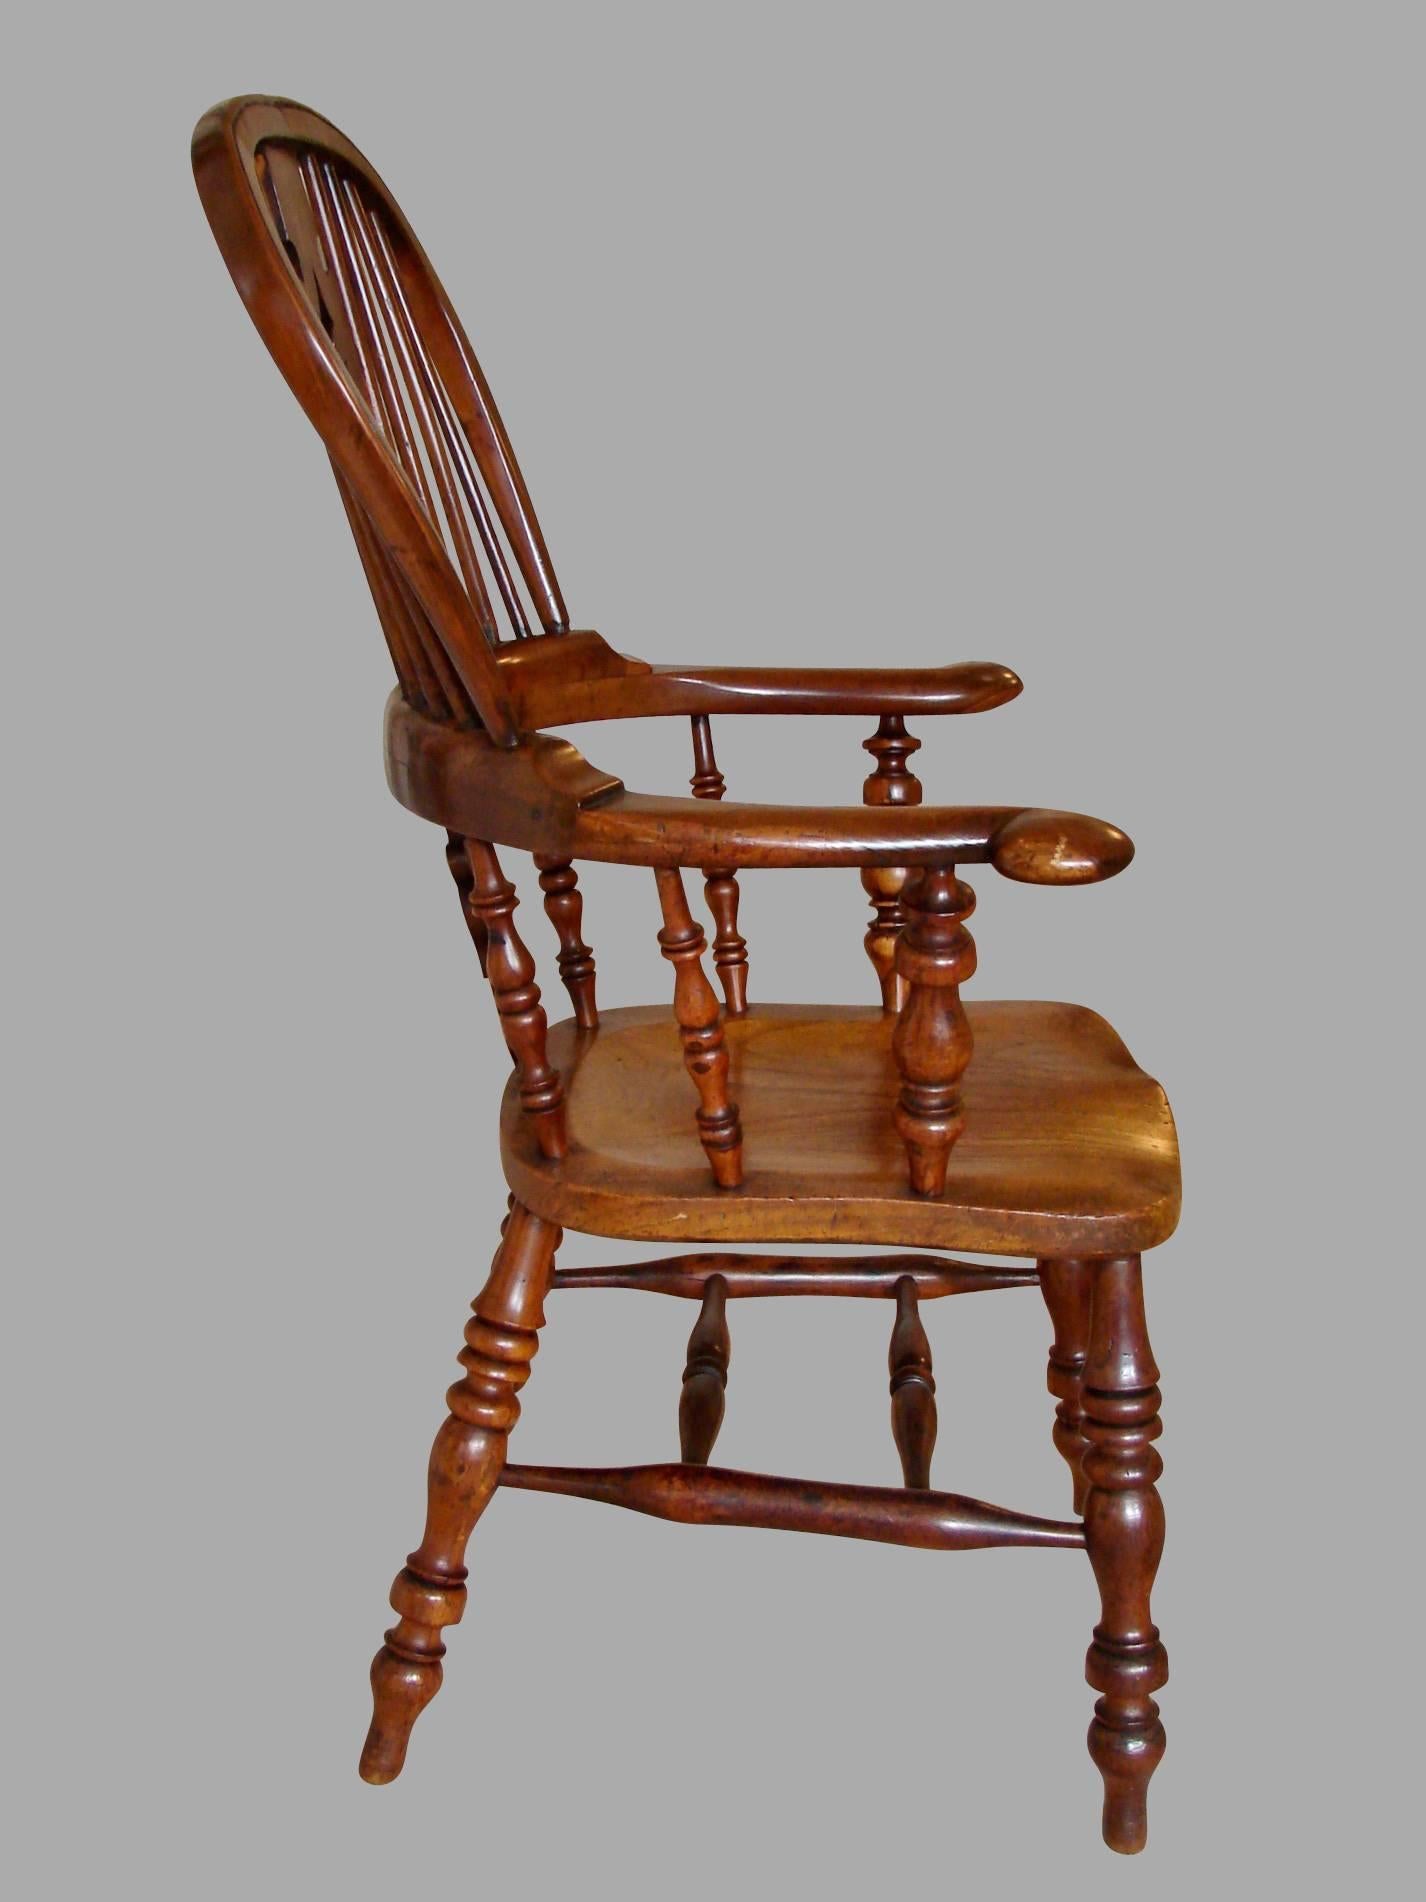 A good English yew wood broad arm high back Windsor chair with a Christmas tree splat, the hickory seat supported on well-turned legs joined by single stretcher, circa 1840-1860.